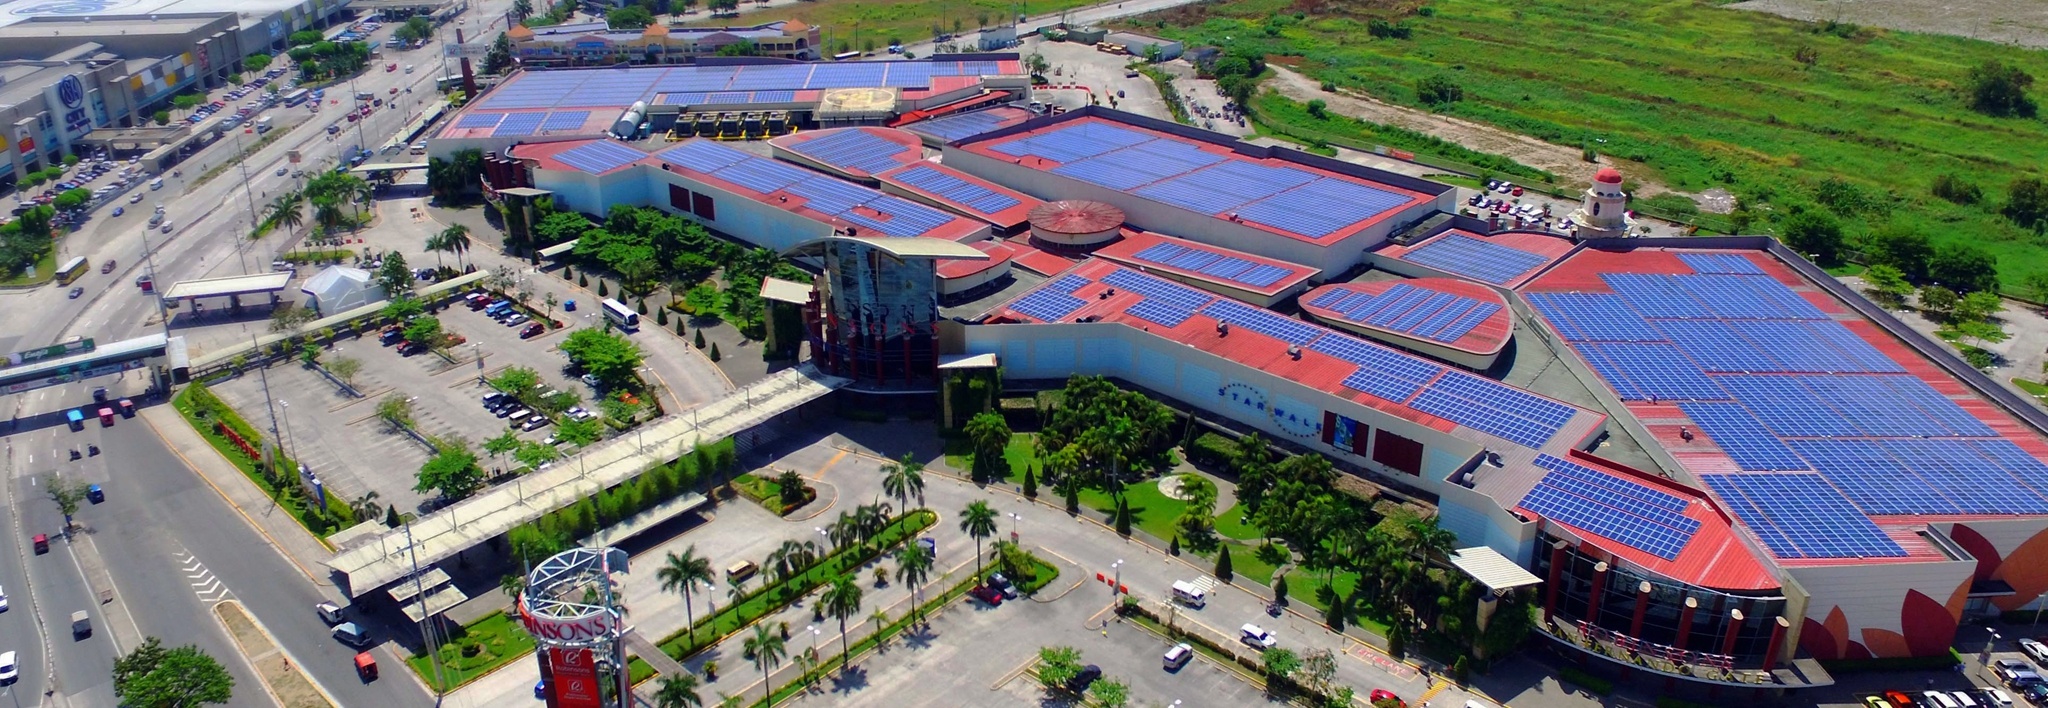 Clenergy Rooftop 2.88 Solar Project in the Philippines